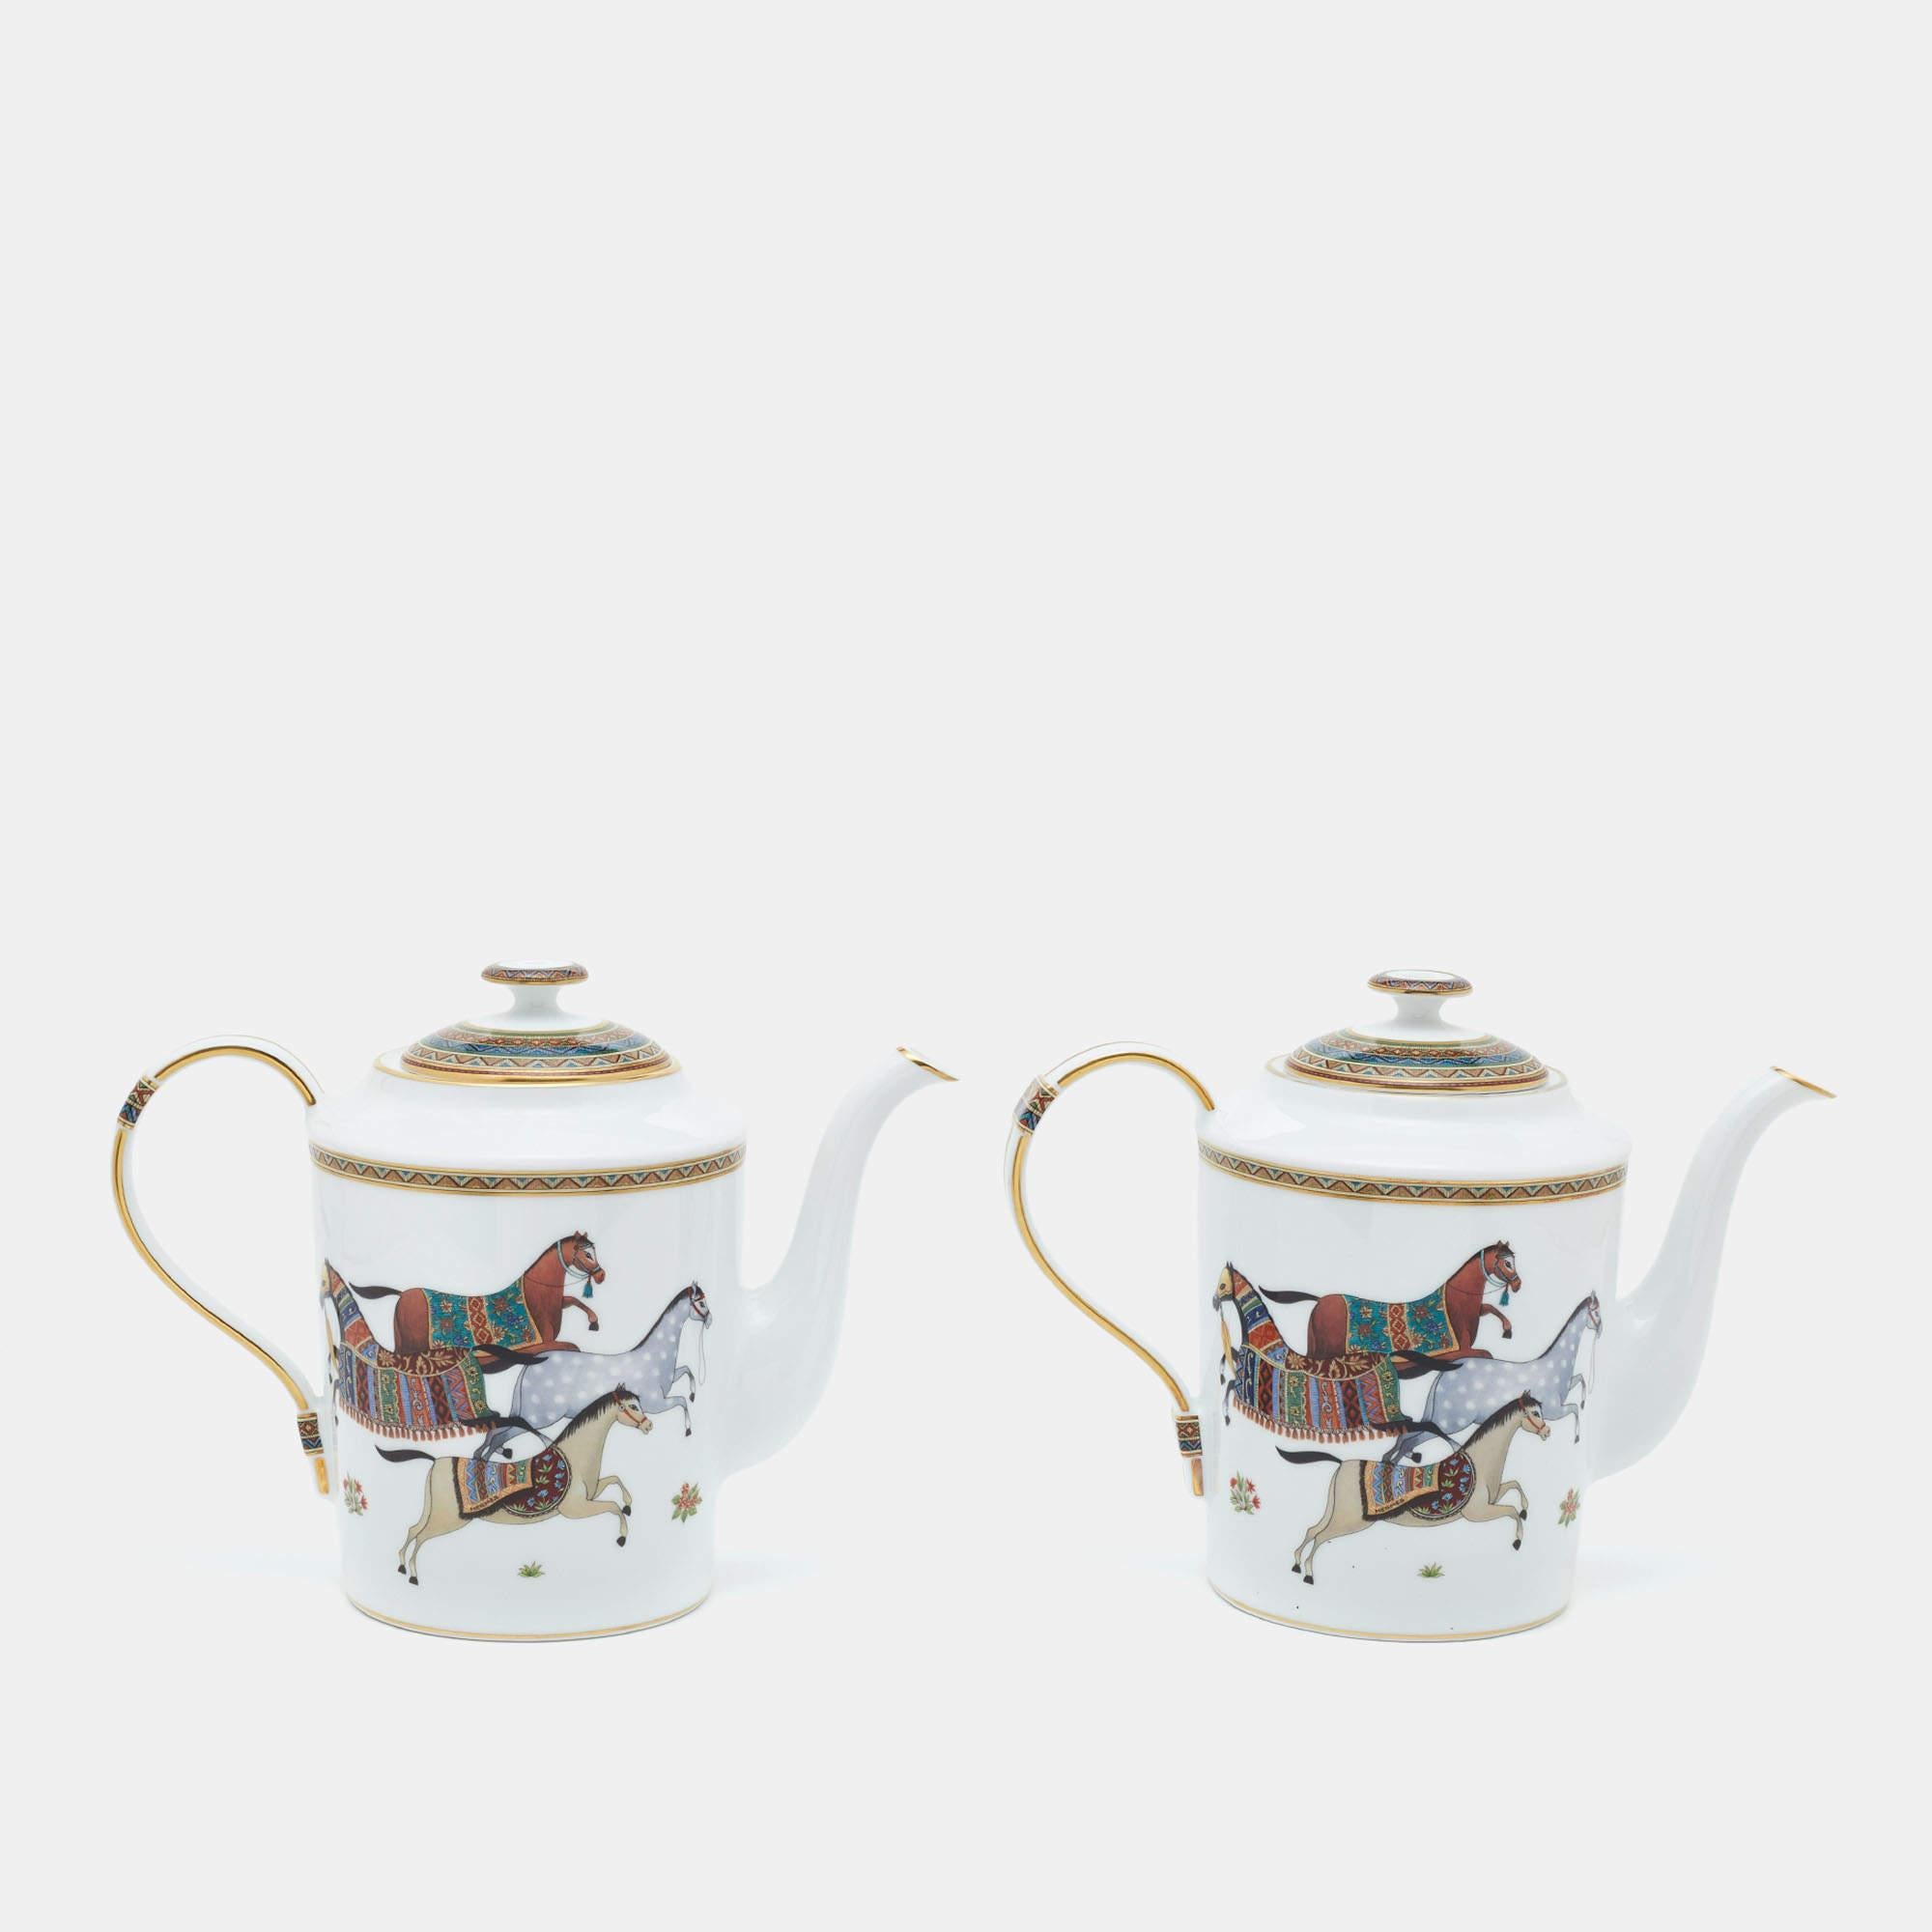 The Hermès teapots set of 2 exudes elegance with its white porcelain adorned by a delicate Cheval d'Orient print. Each teapot is a work of art, featuring intricate details and a timeless design, making them a luxurious addition to any tea lover's